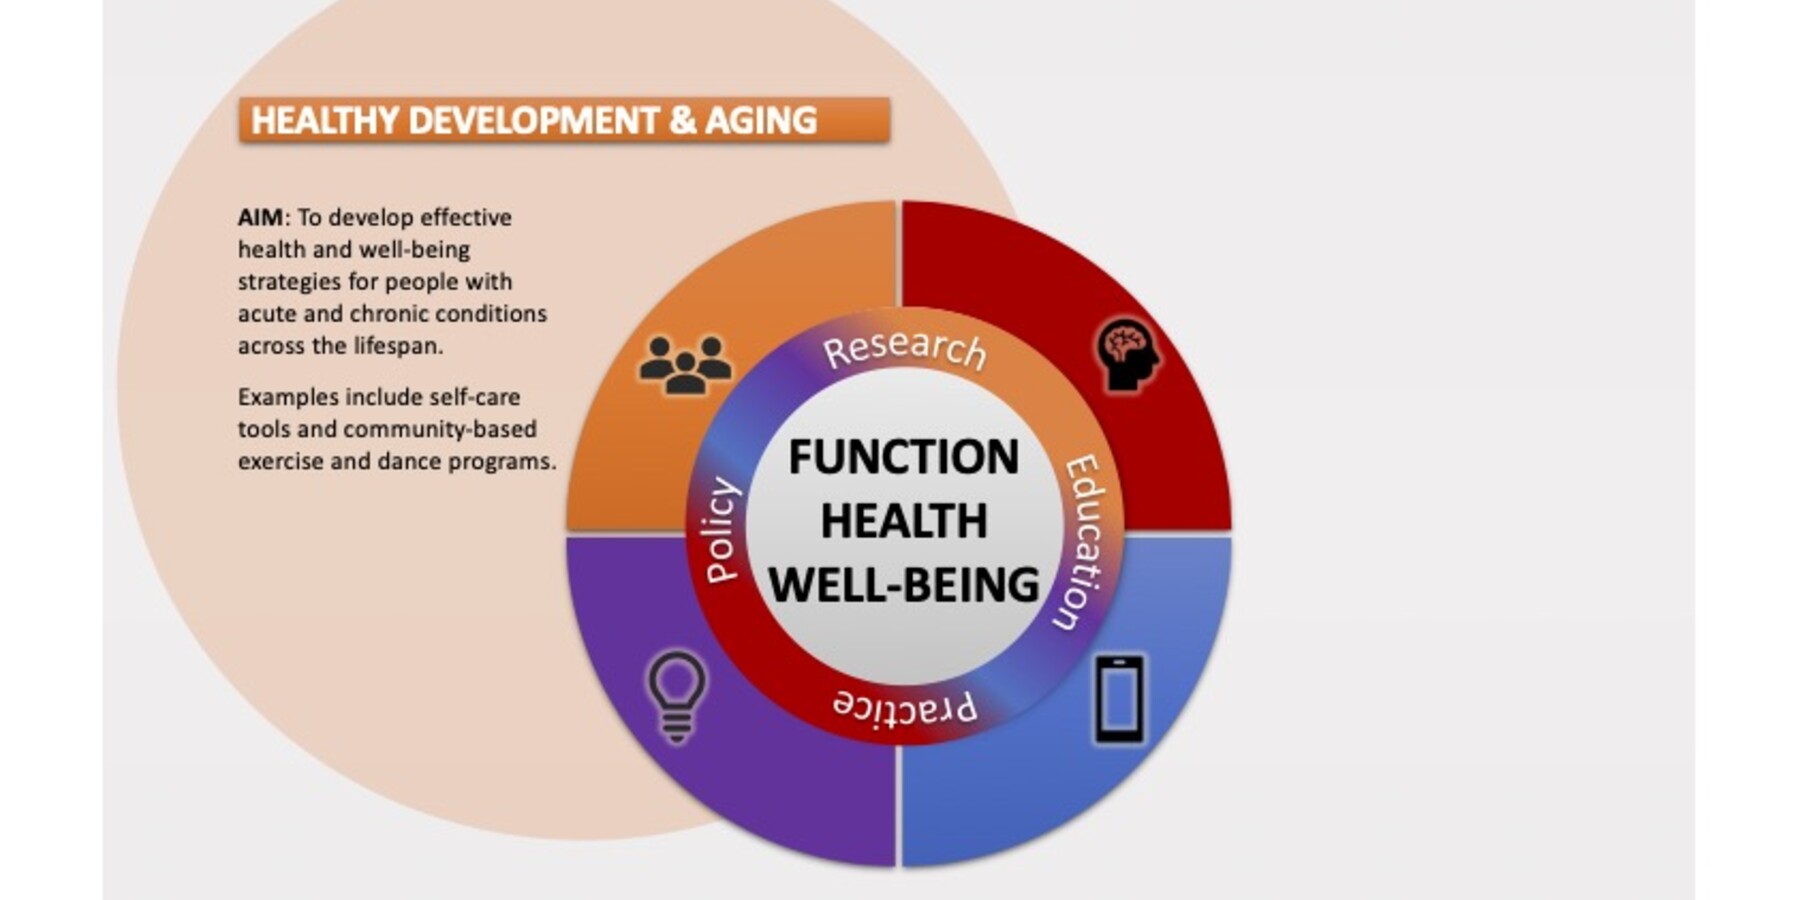 Graphic describing the aim of the Healthy Development & Aging research platform